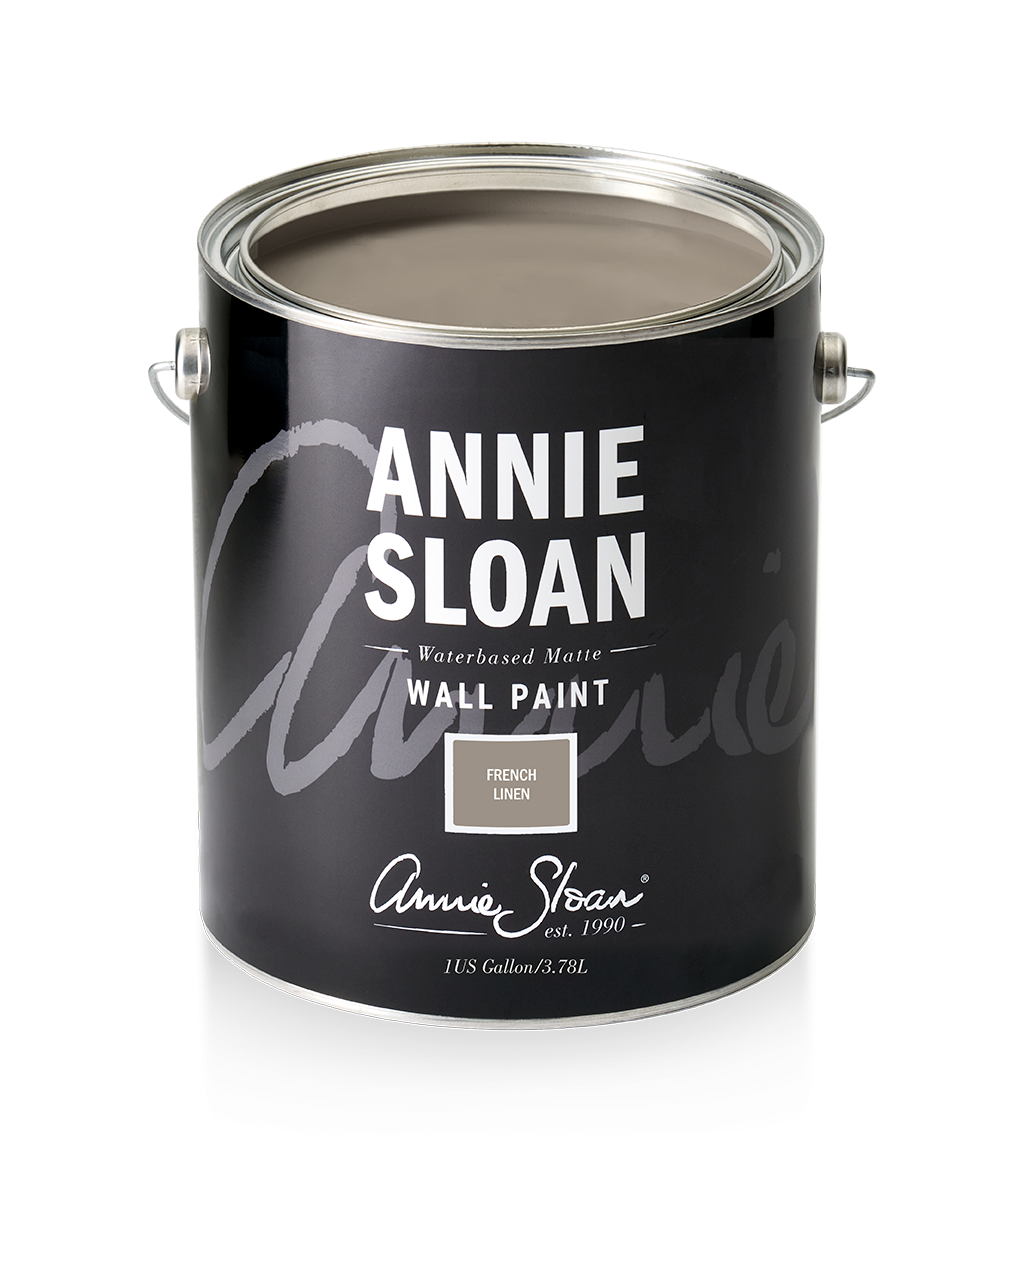 Annie Sloan Wall Paint French Linen, 1 Gallon